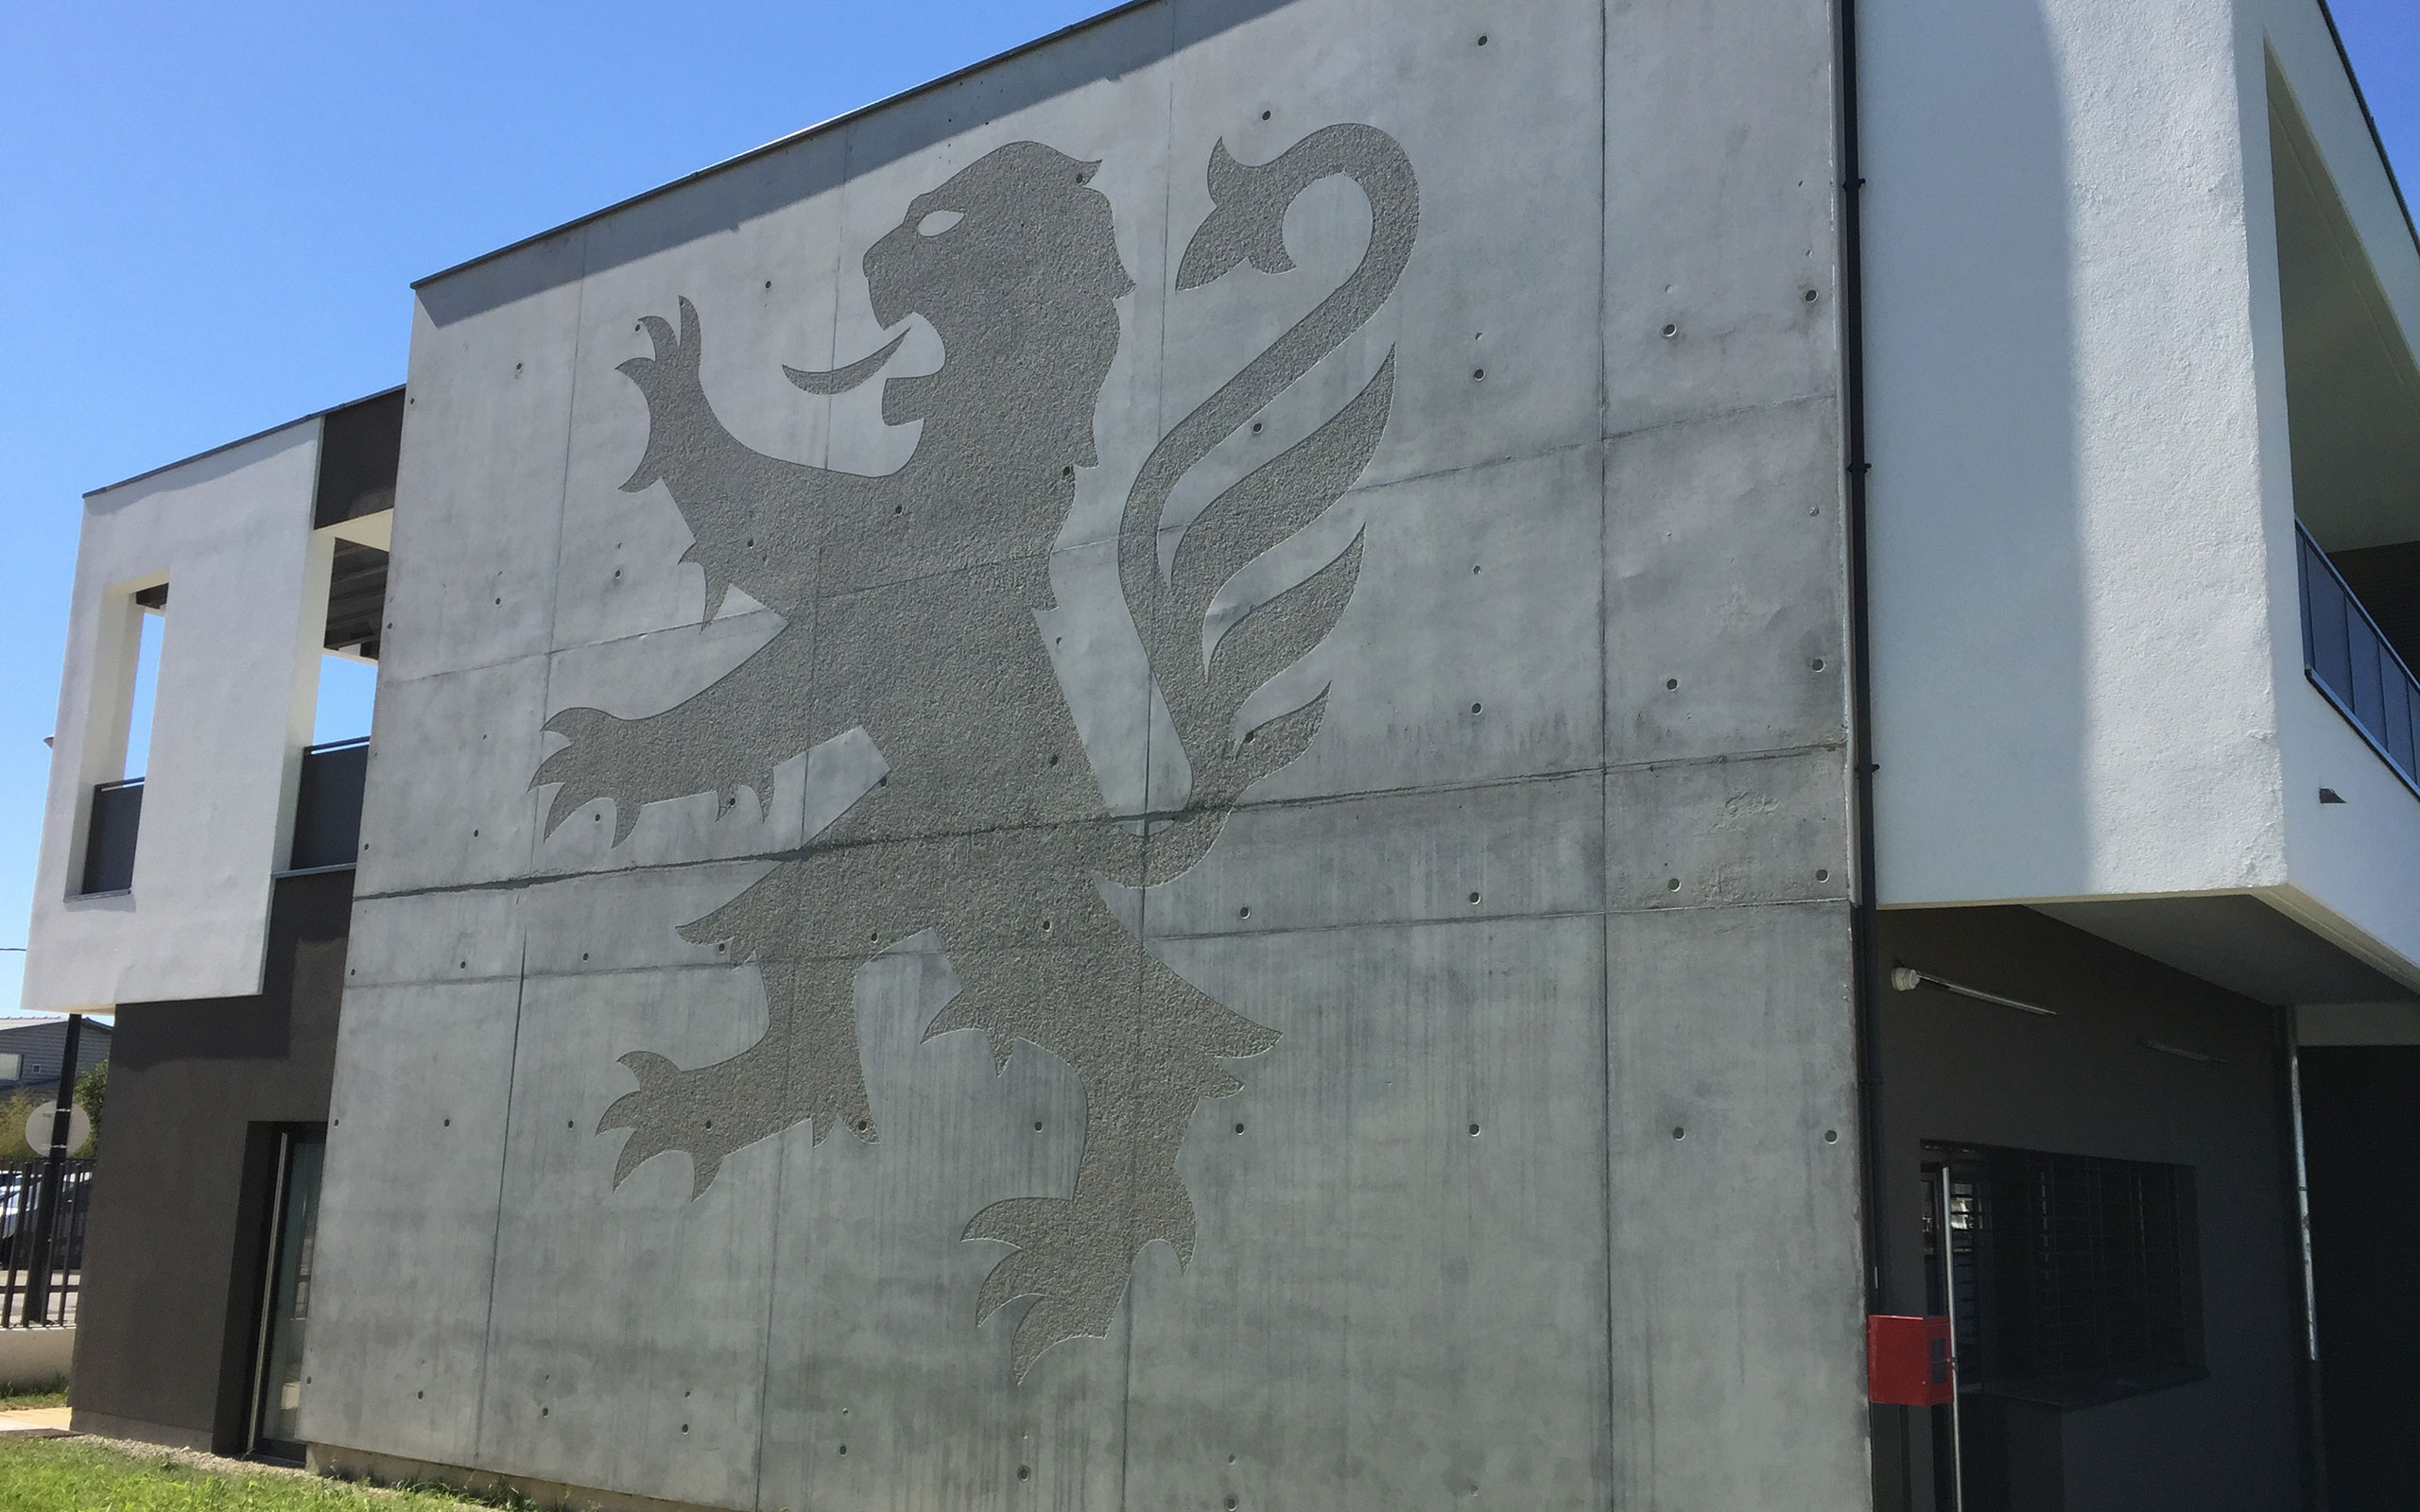 Through a feat of technical and aesthetic ingenuity, the club’s logo was rendered onto the entrance wall.  Credits: Atelier Thierry Roche et Associés